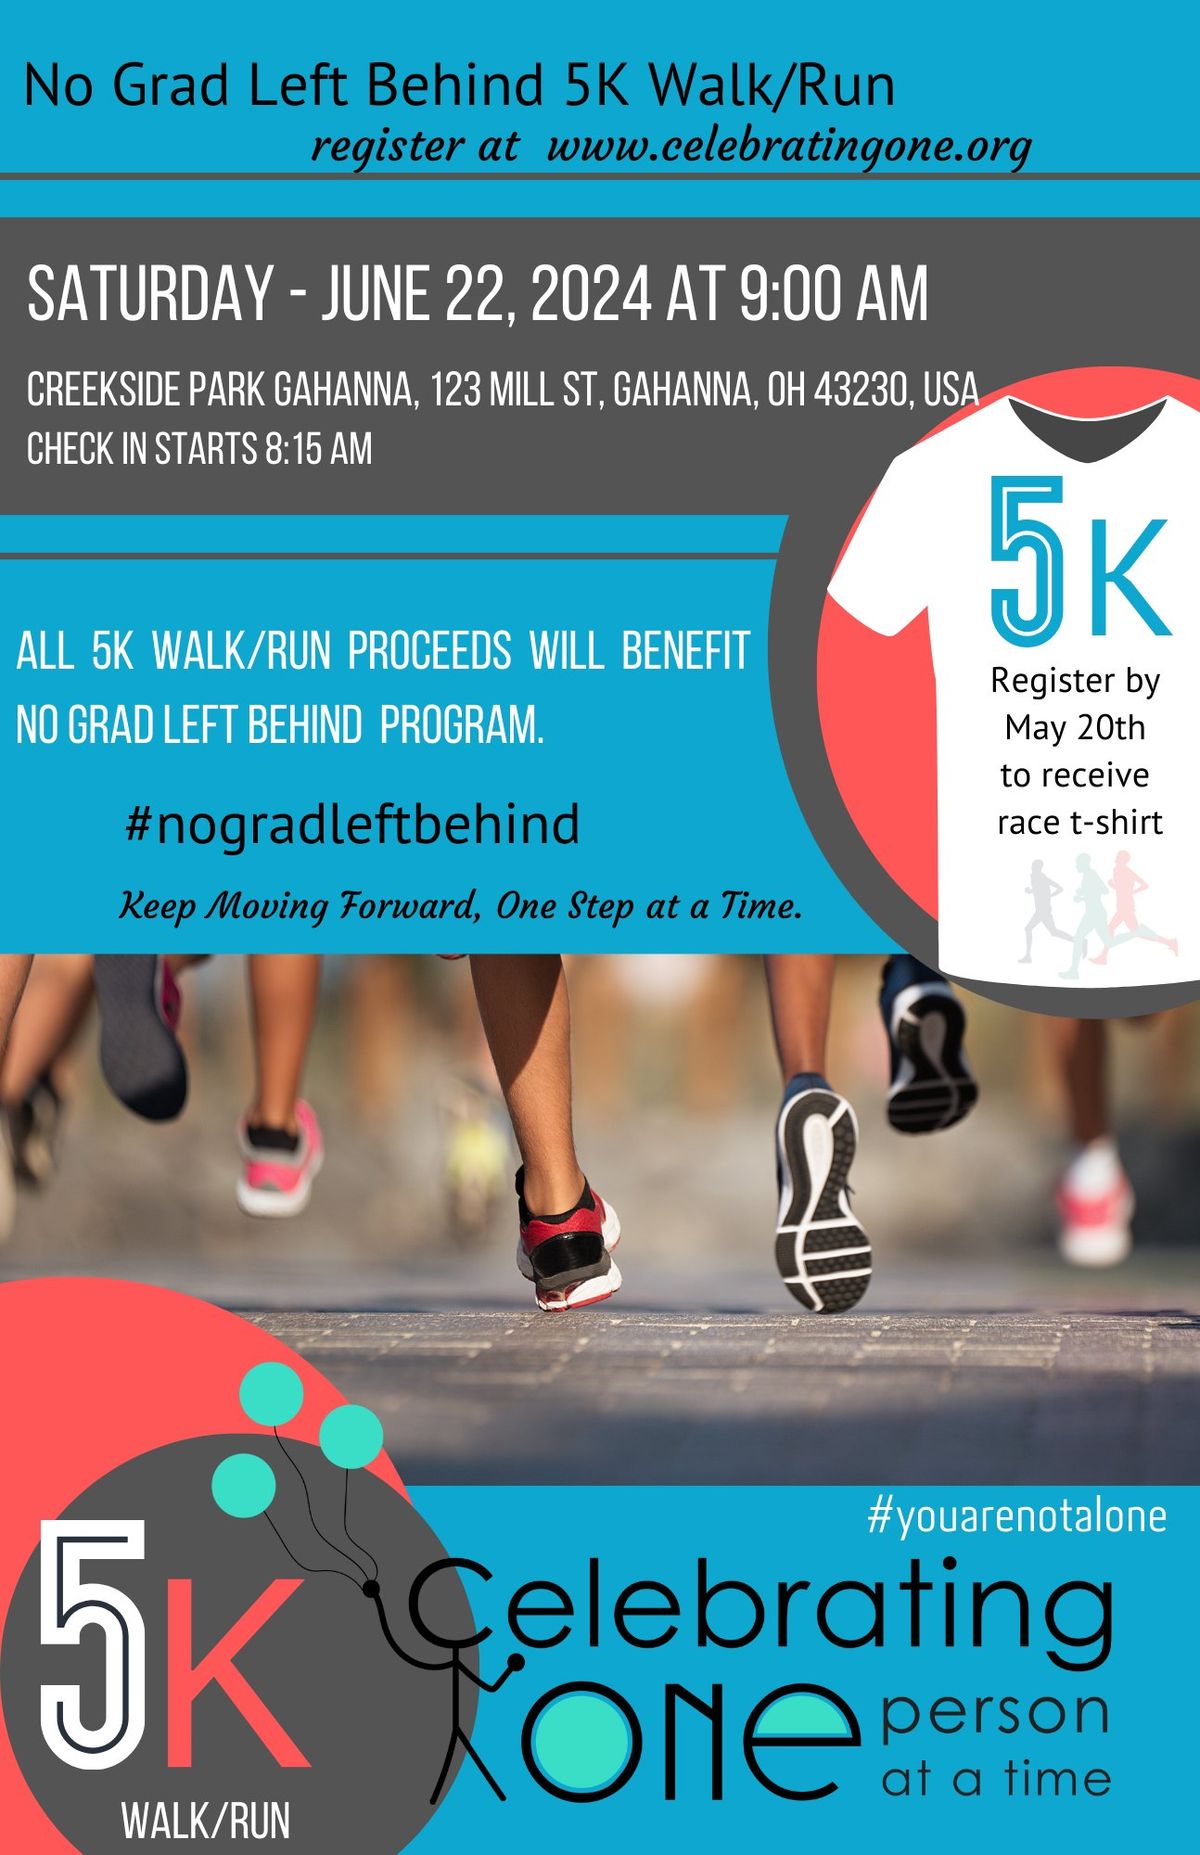 5K Walk\/Run for the cause - No Grad Left Behind